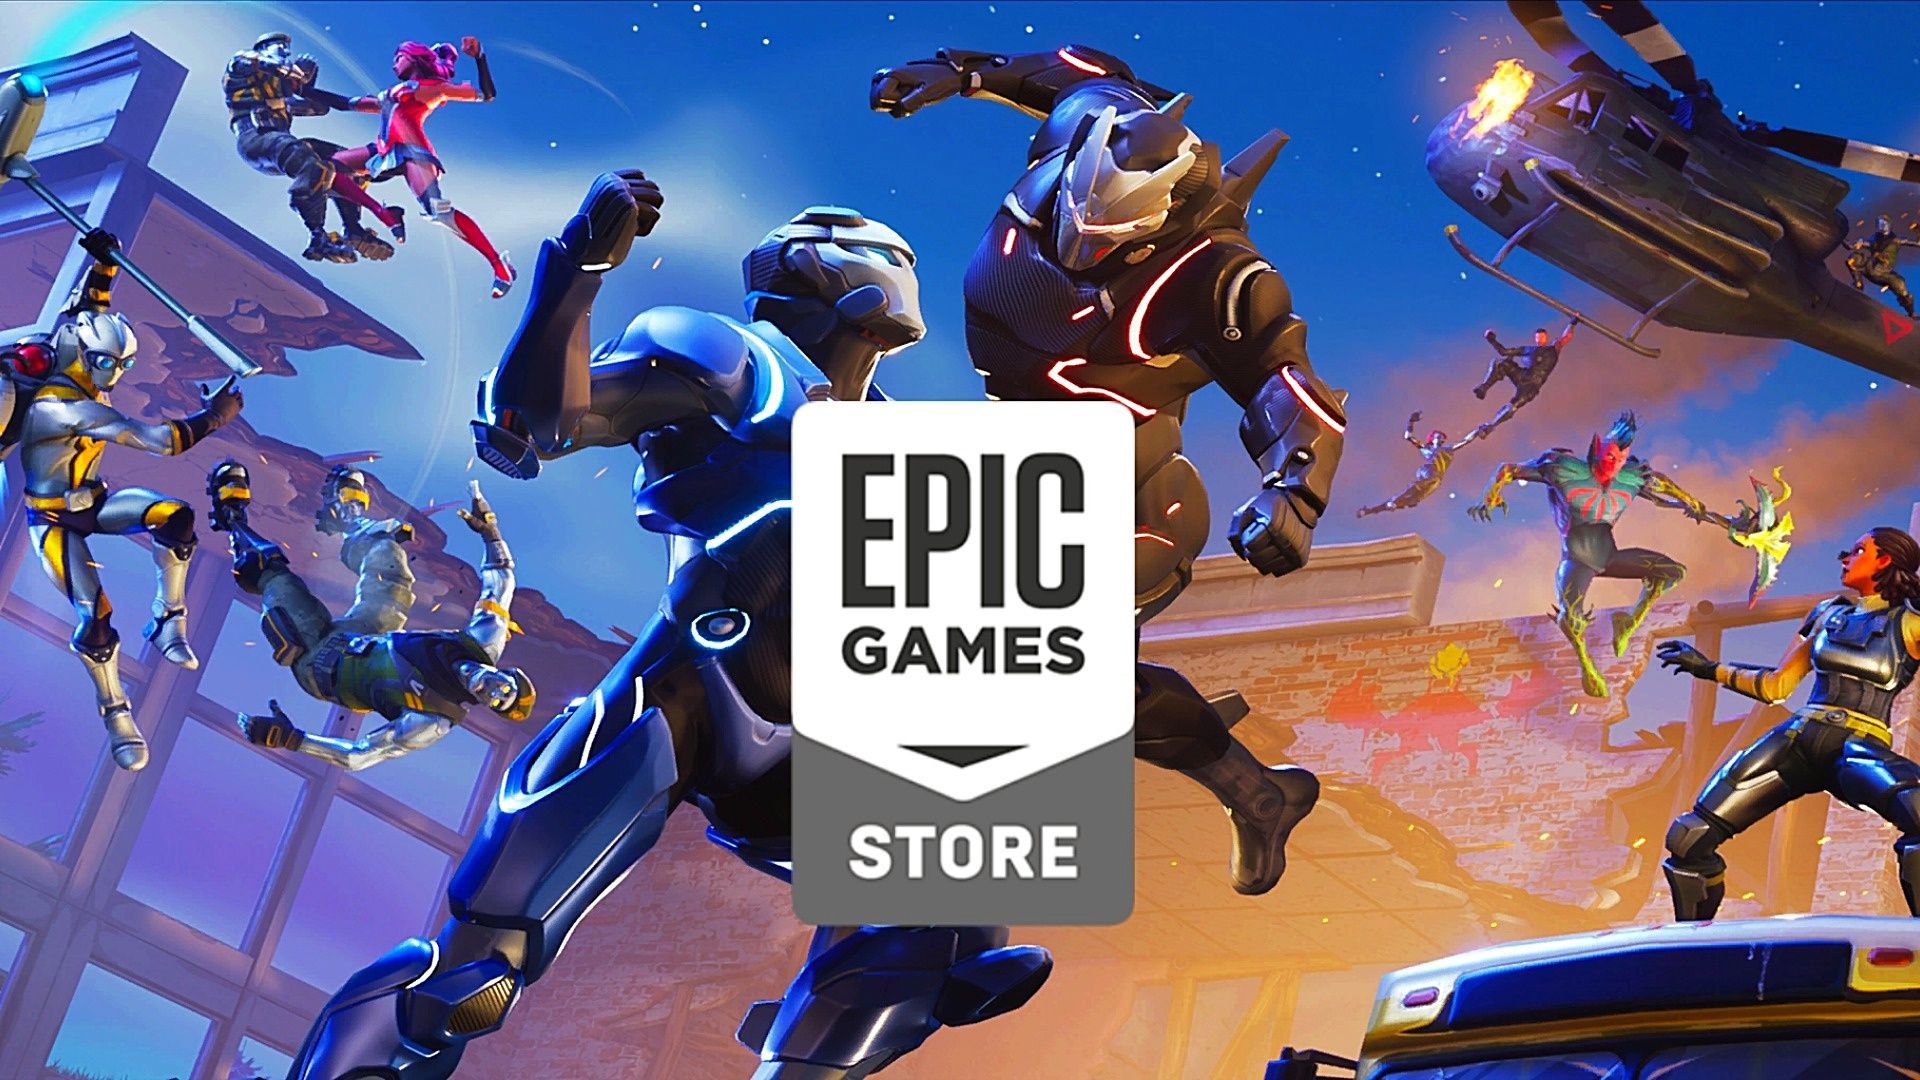 Epic is offering '12 Days of Free Games' for the holiday season